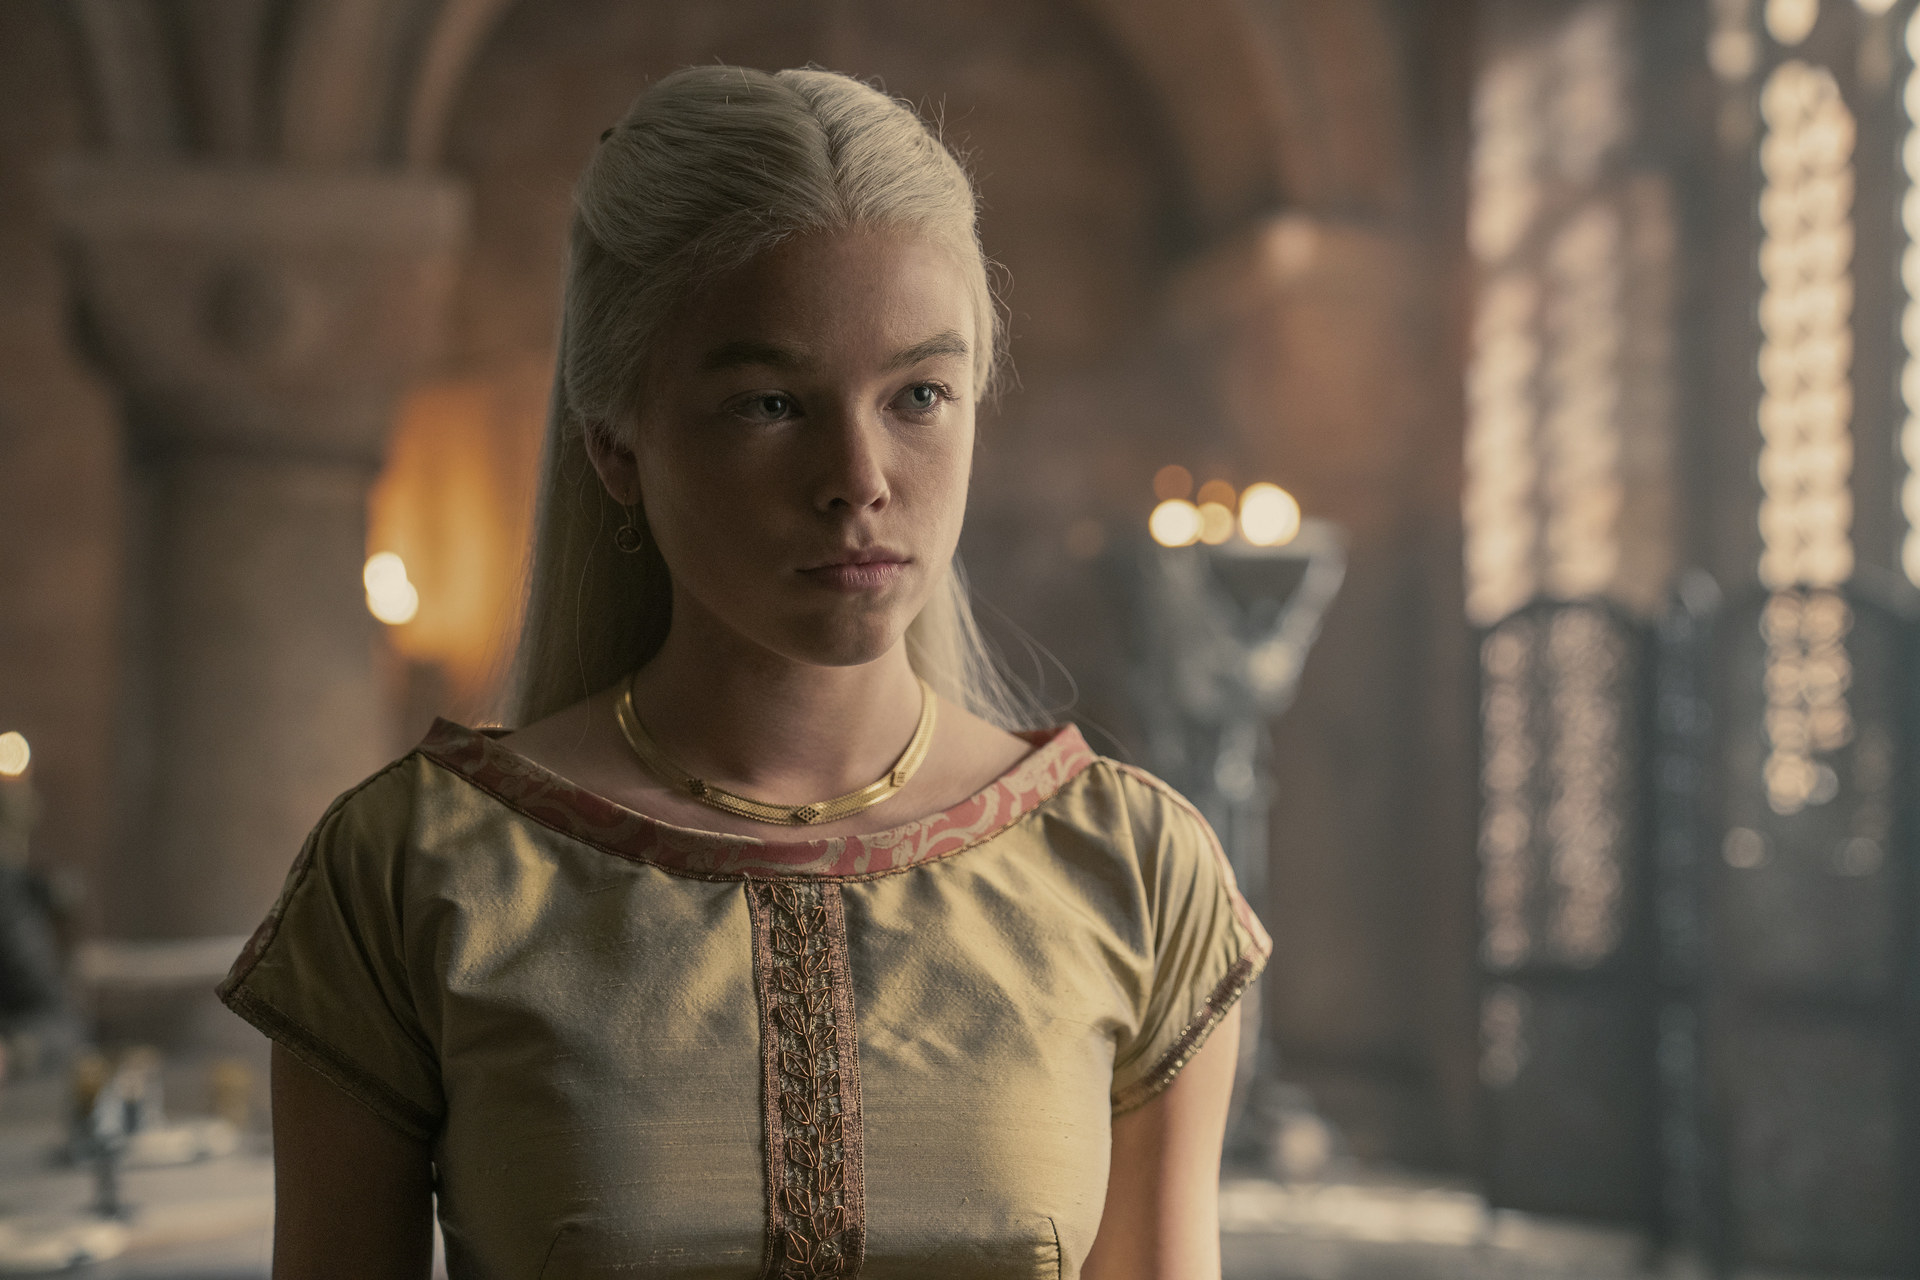 Rhaenyra Targaryen wears a gold gown and stands in the palace